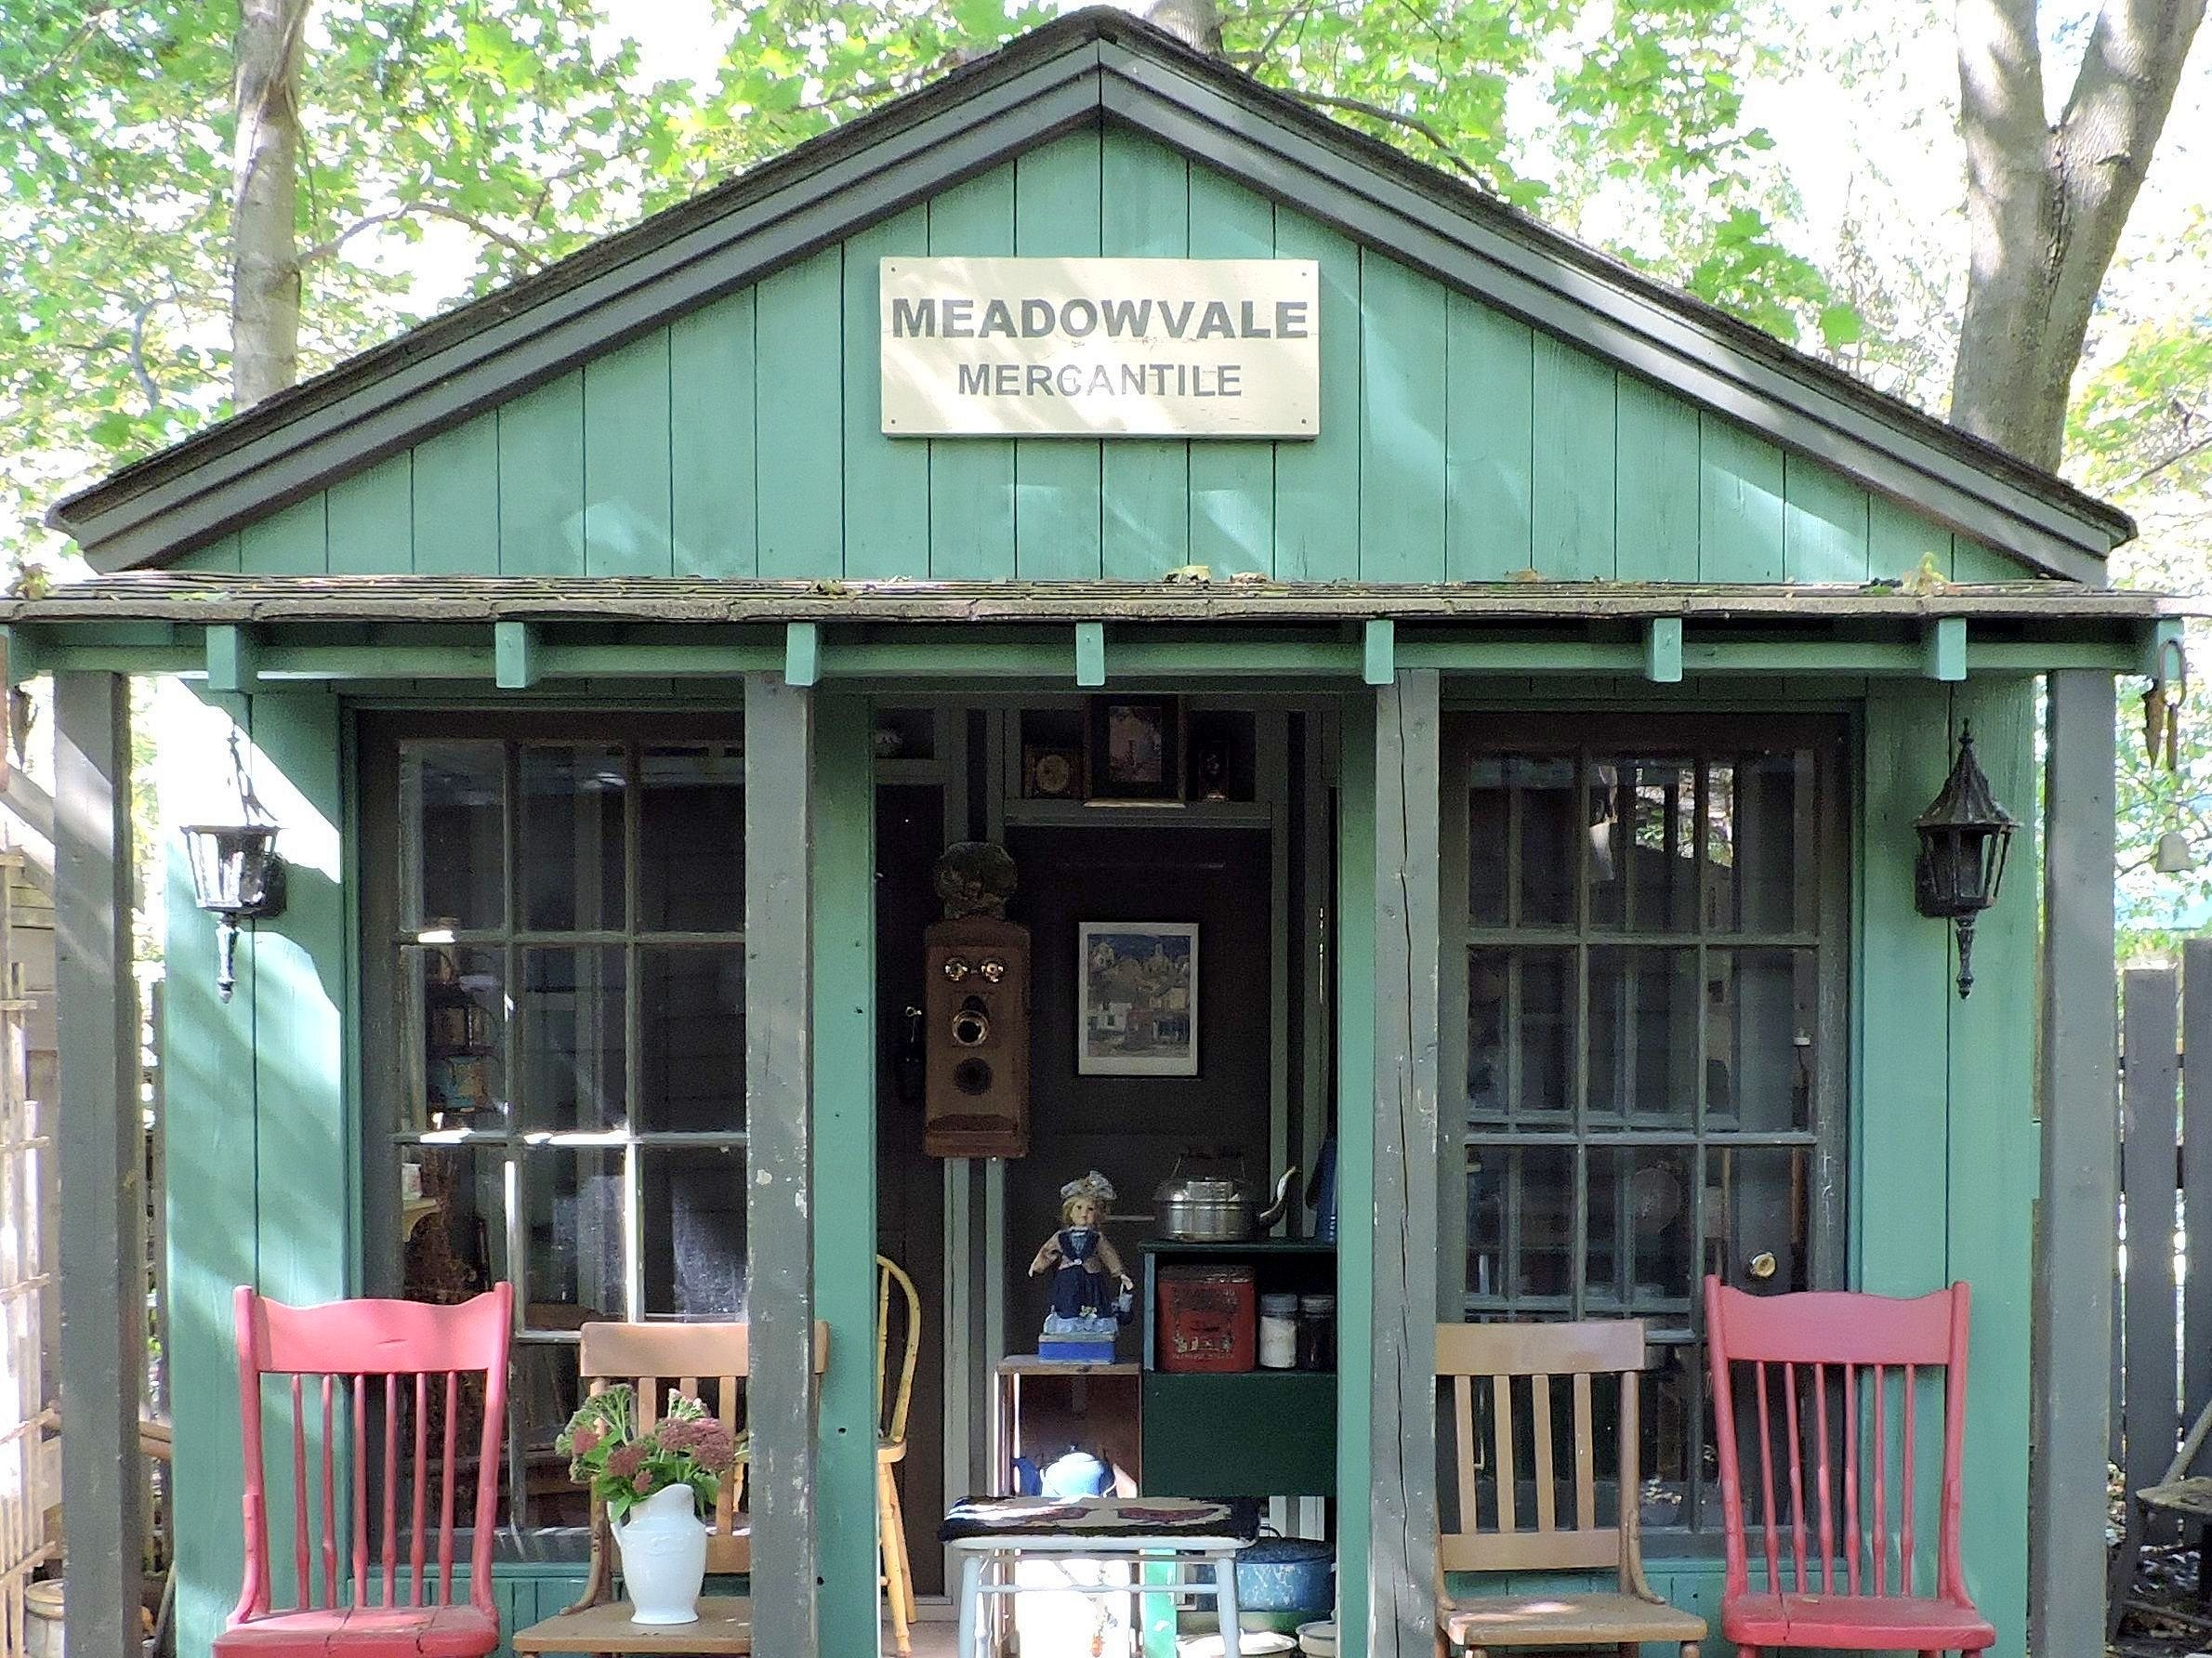 Meadowvale Mercantile Little Village in the Valley Mississauga Google image from https://culturedays.ca/en/2018-activities/view/5b182c12-02e4-4426-a309-496b8ac5a4f1